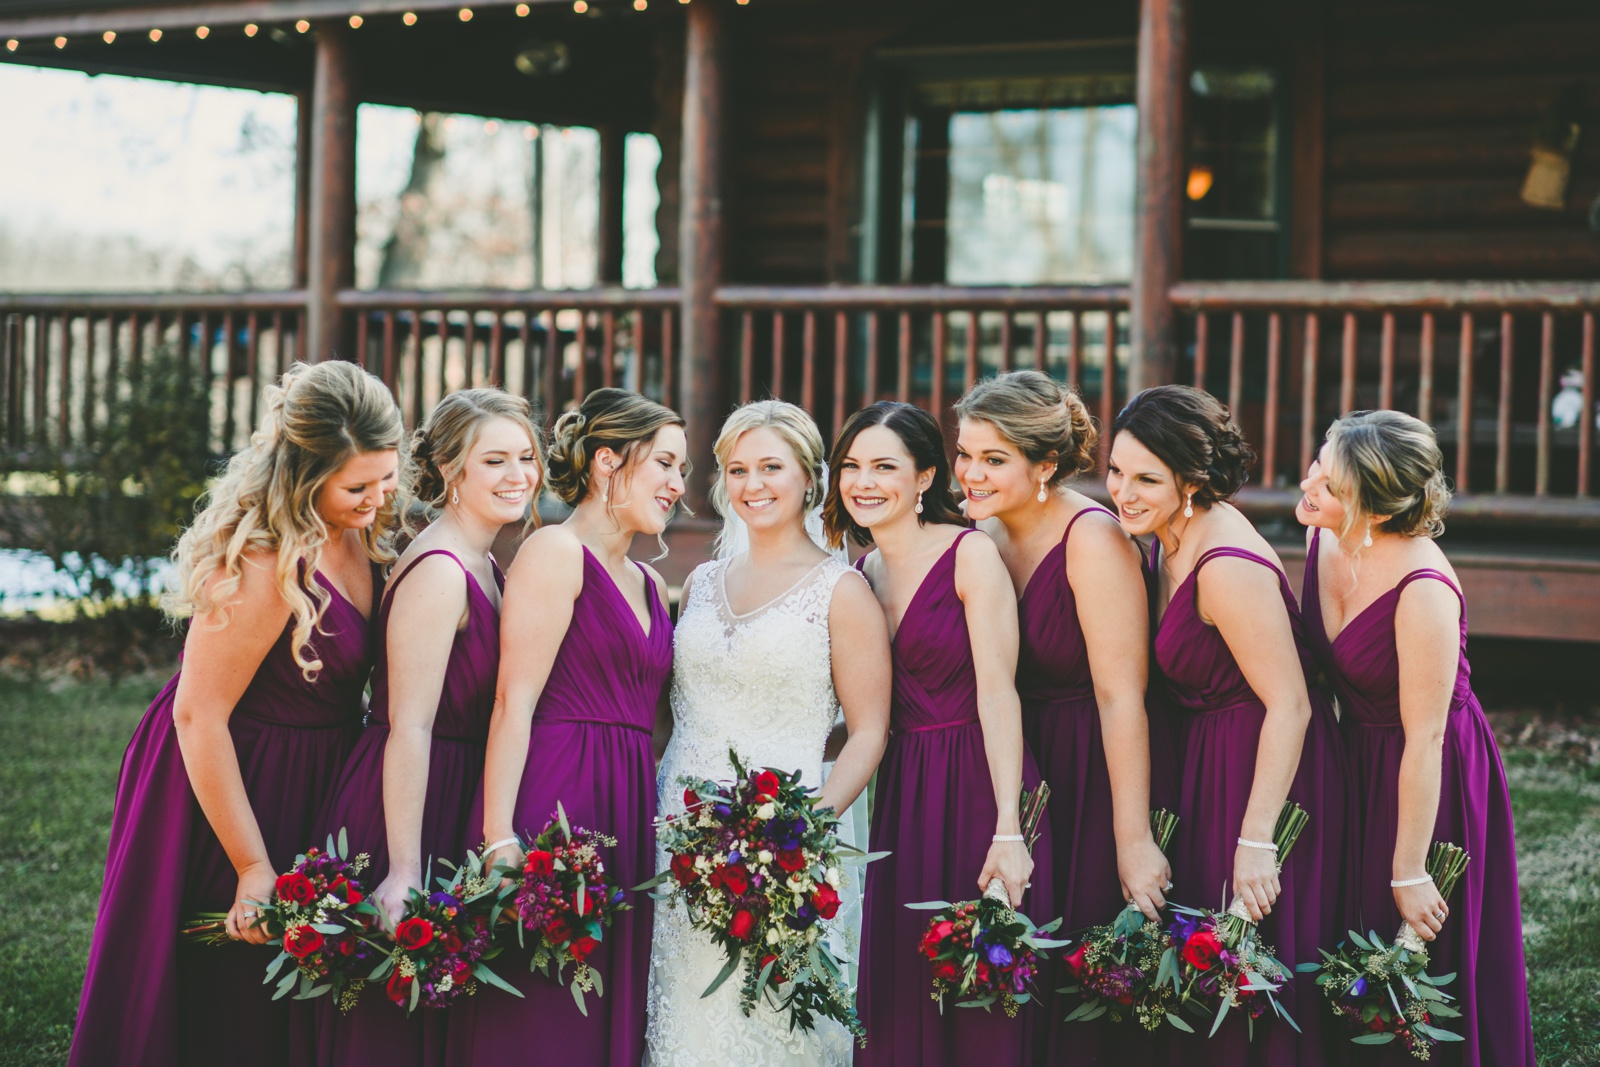 Shana & Weston | Champaign, IL Mulberry & Charcoal Events at the ...